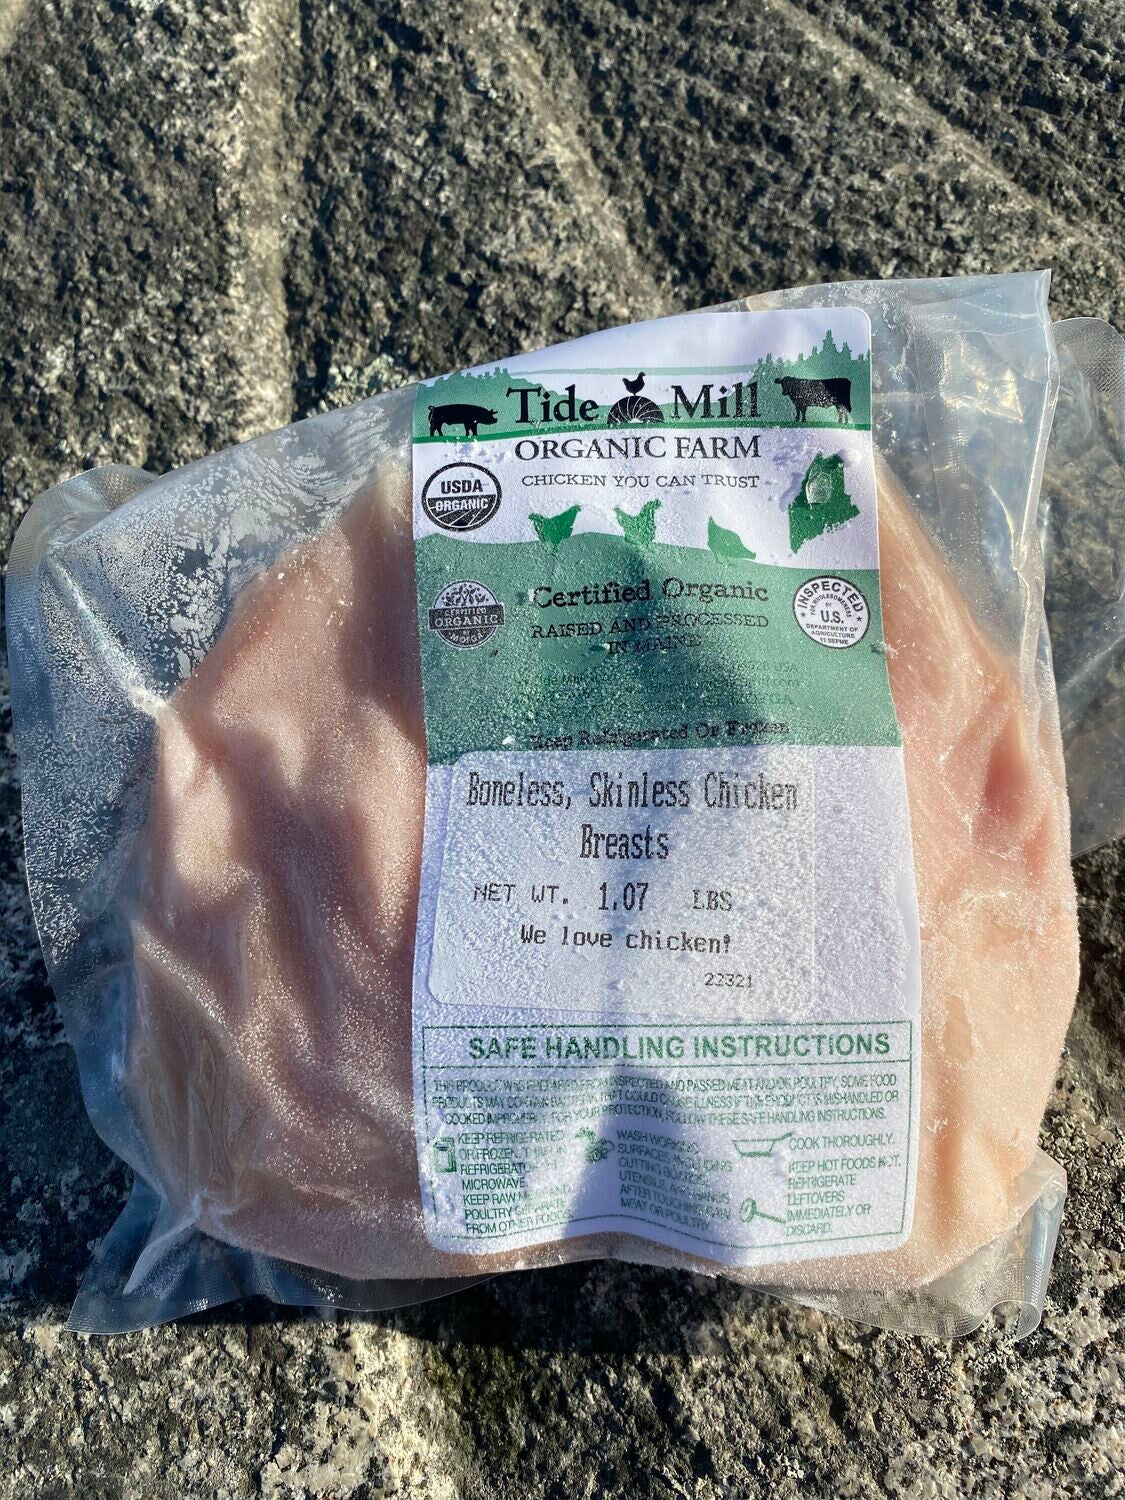 A package of boneless, skinless organic chicken breasts